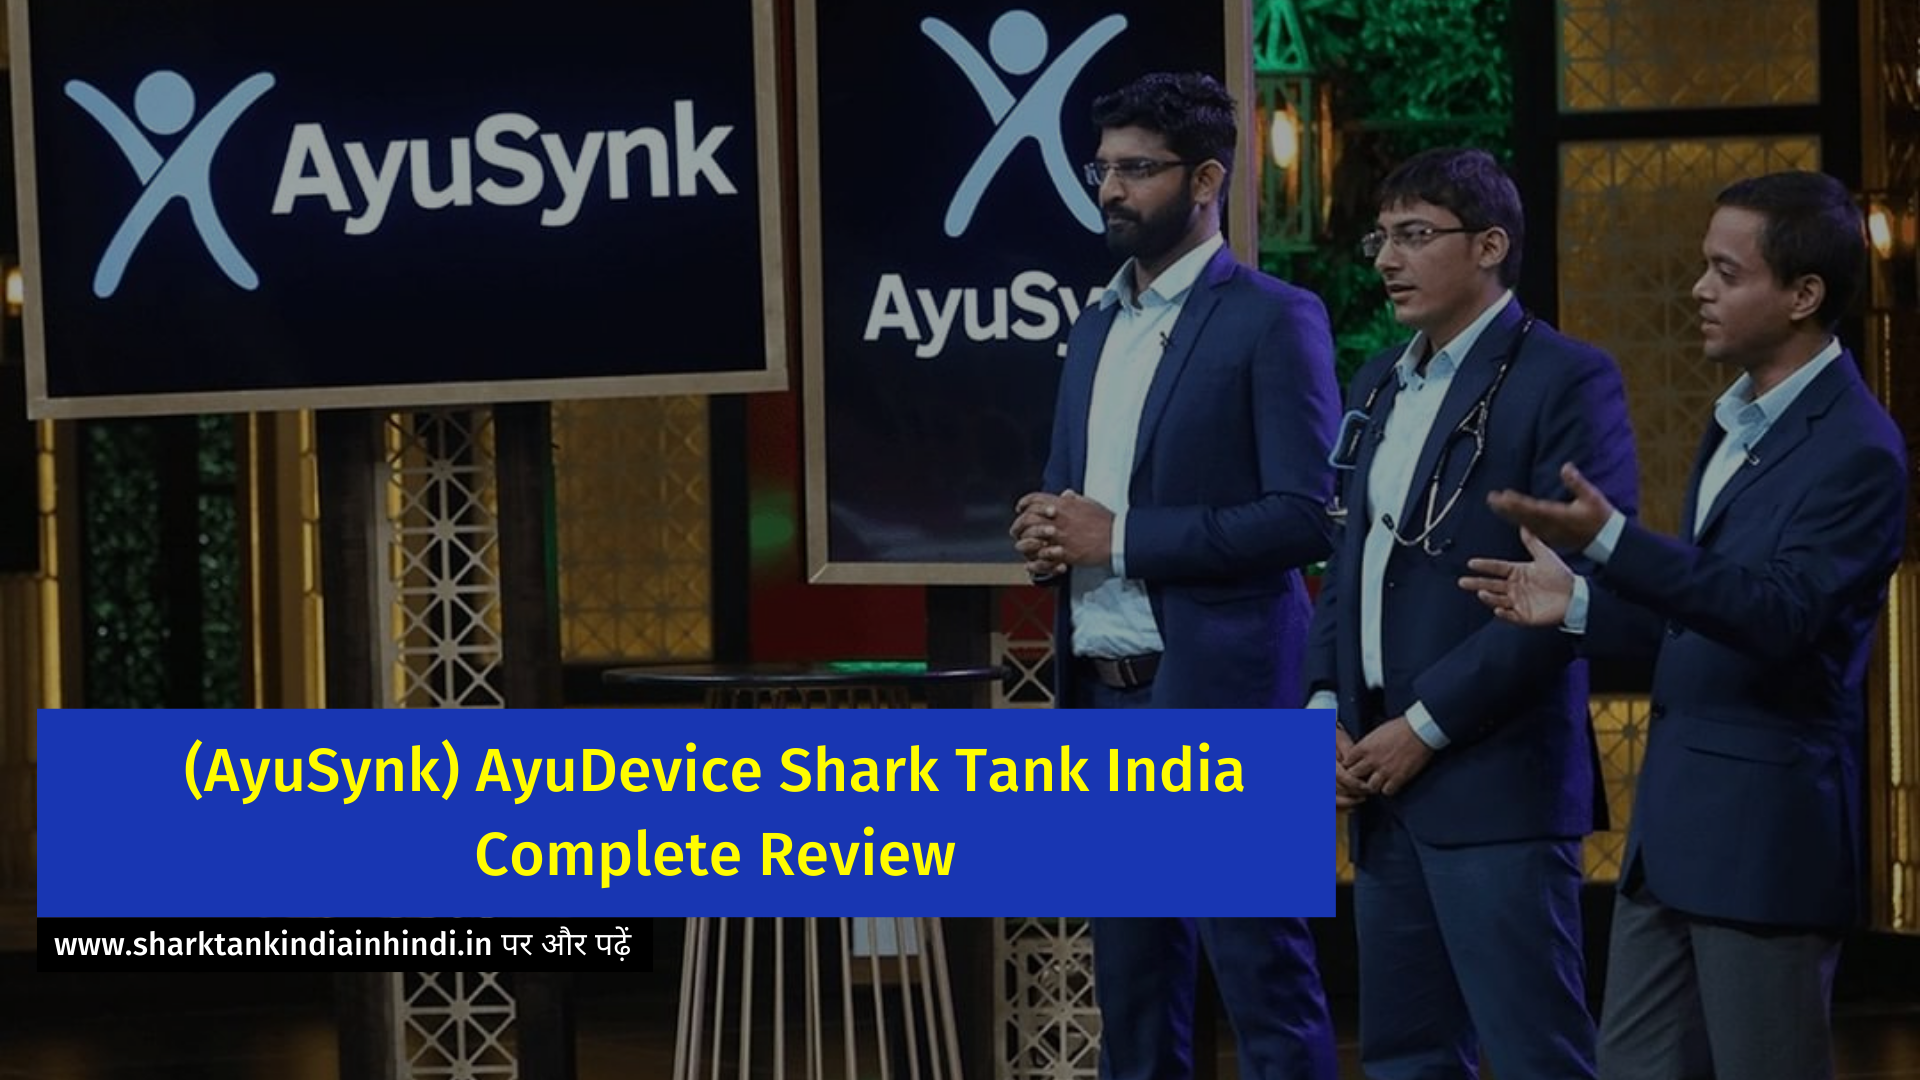 (AyuSynk) AyuDevice Shark Tank India Complete Review